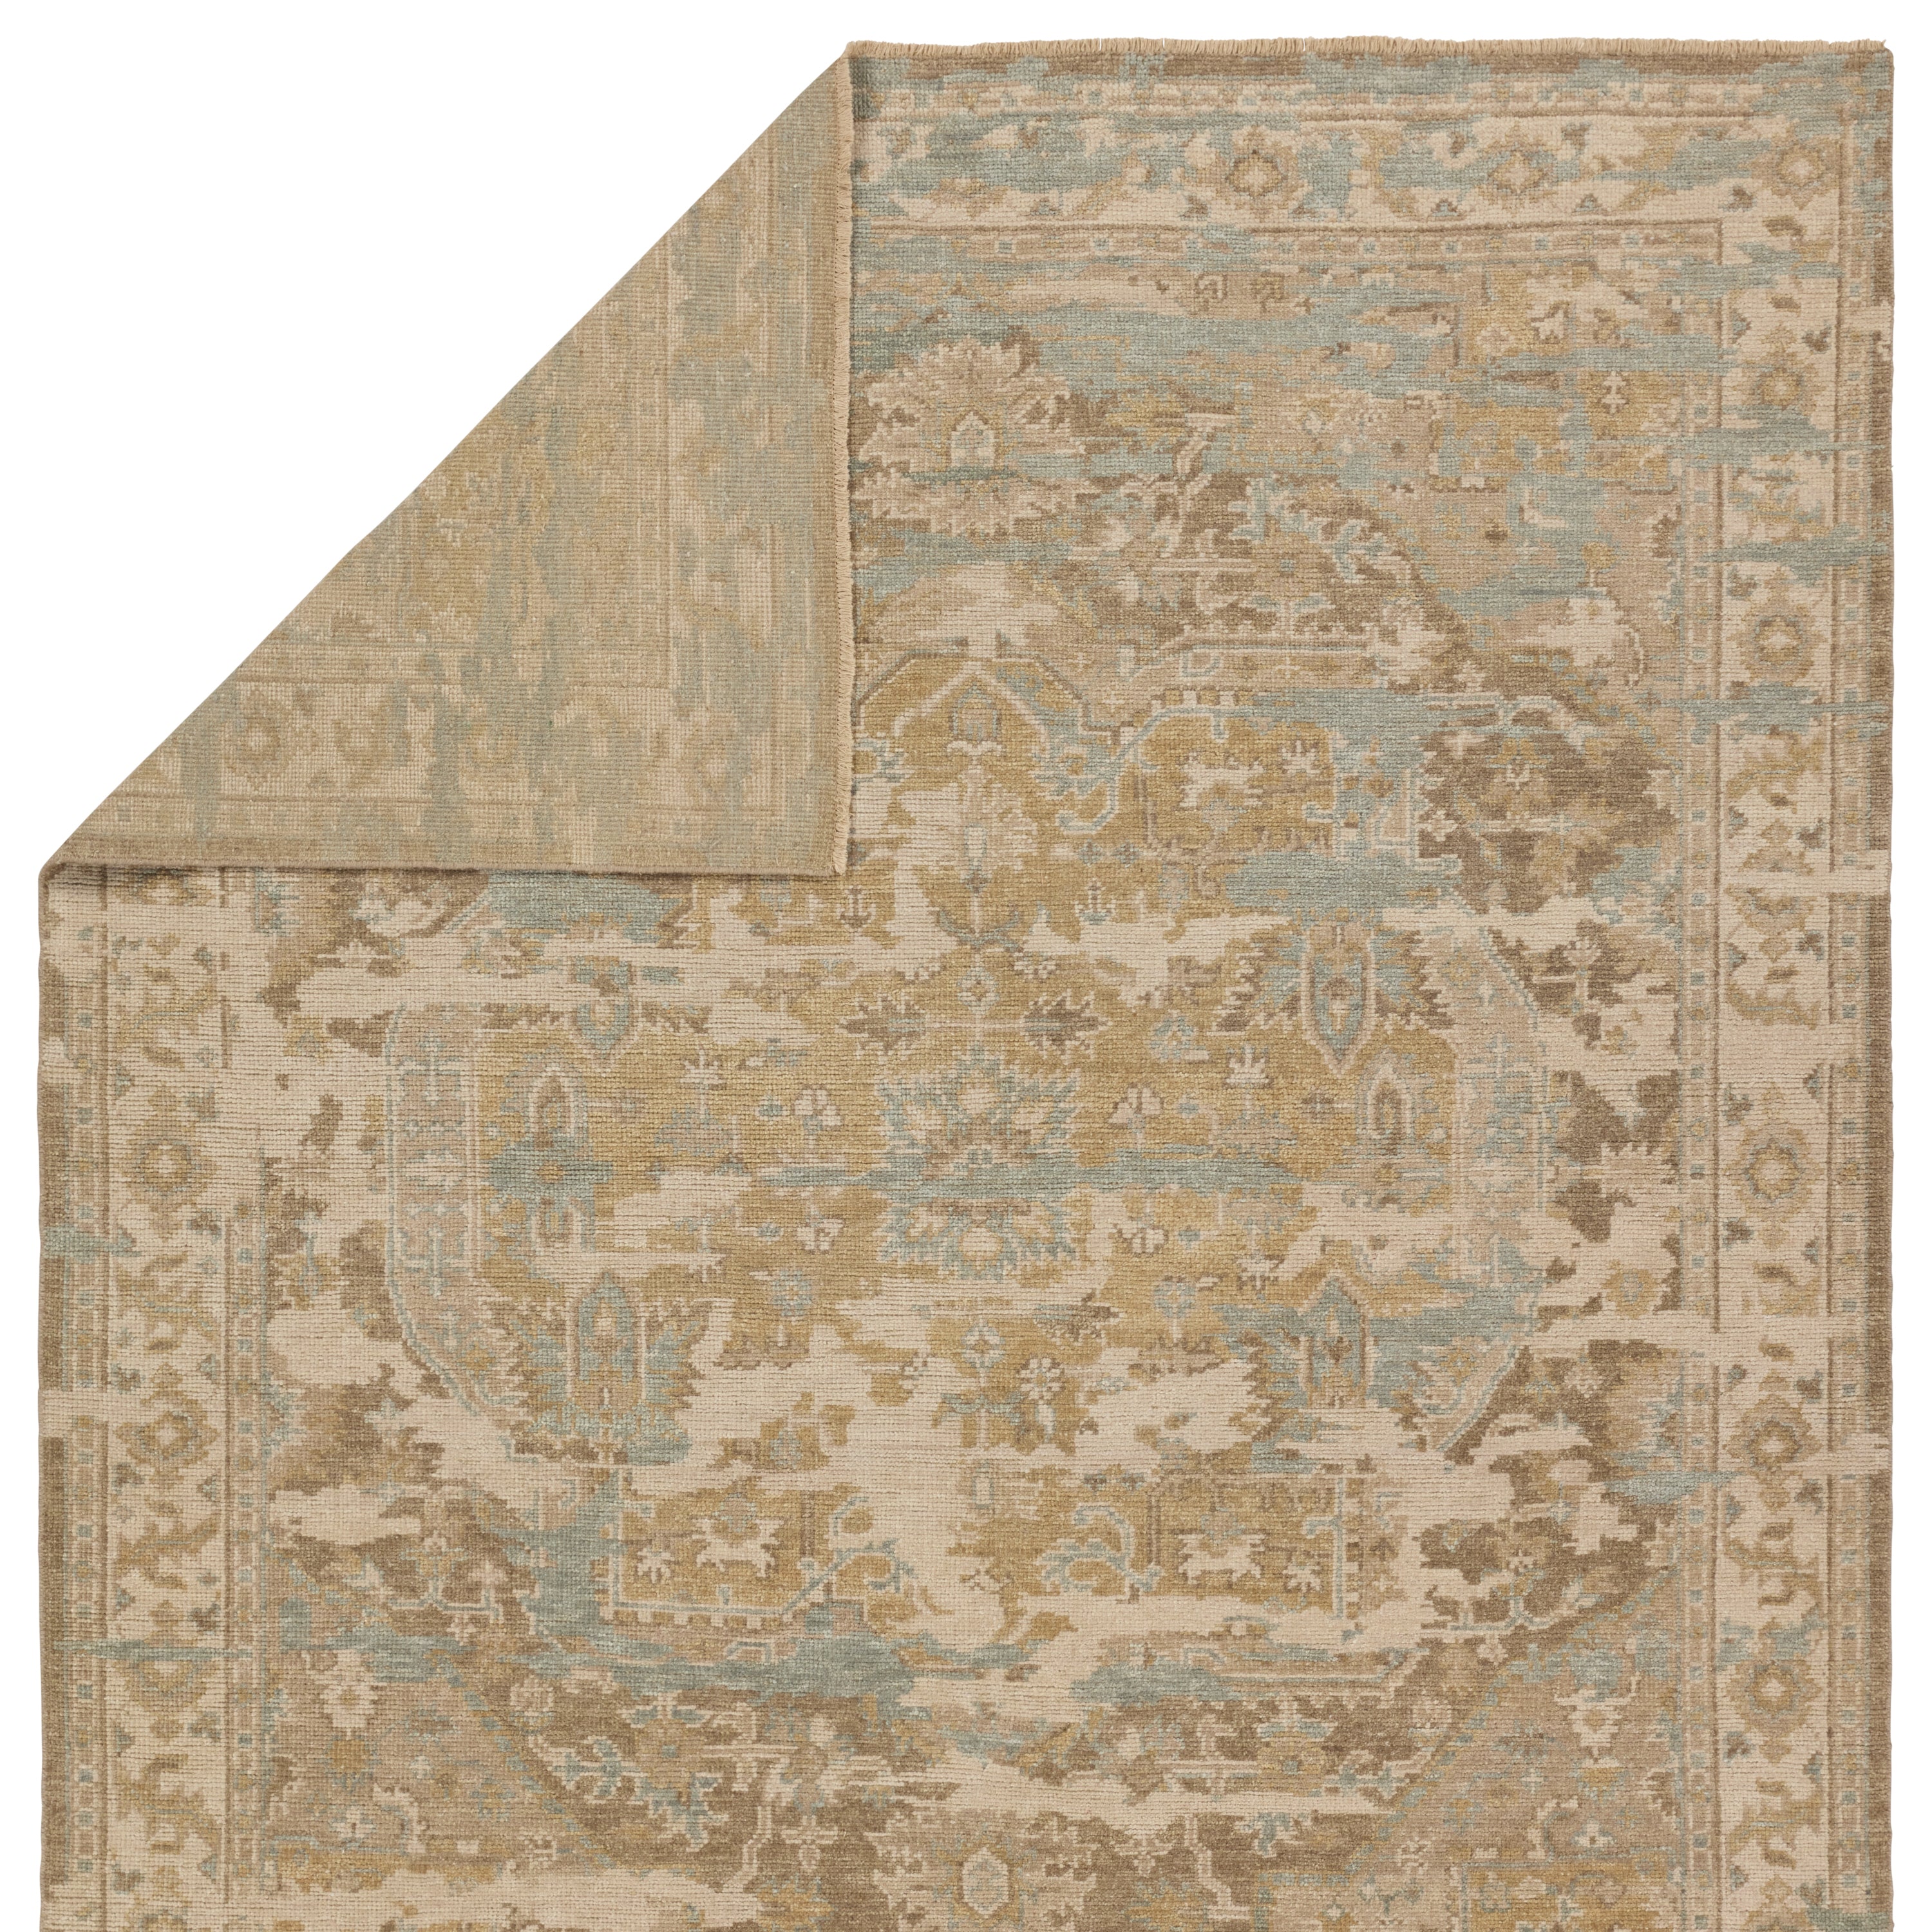 The Rhapsody collection features heirloom-quality designs of stunningly abrashed Old World patterns. The Cadenza area rug boasts a beautifully distressed medallion motif with a decorative border. The khaki tones are accented with slate, beige, cream, and taupe hues for added depth and intrigue. This durable wool handknot anchors living spaces with a fresh take on vintage style. Amethyst Home provides interior design, new construction, custom furniture, and area rugs in the Dallas metro area.